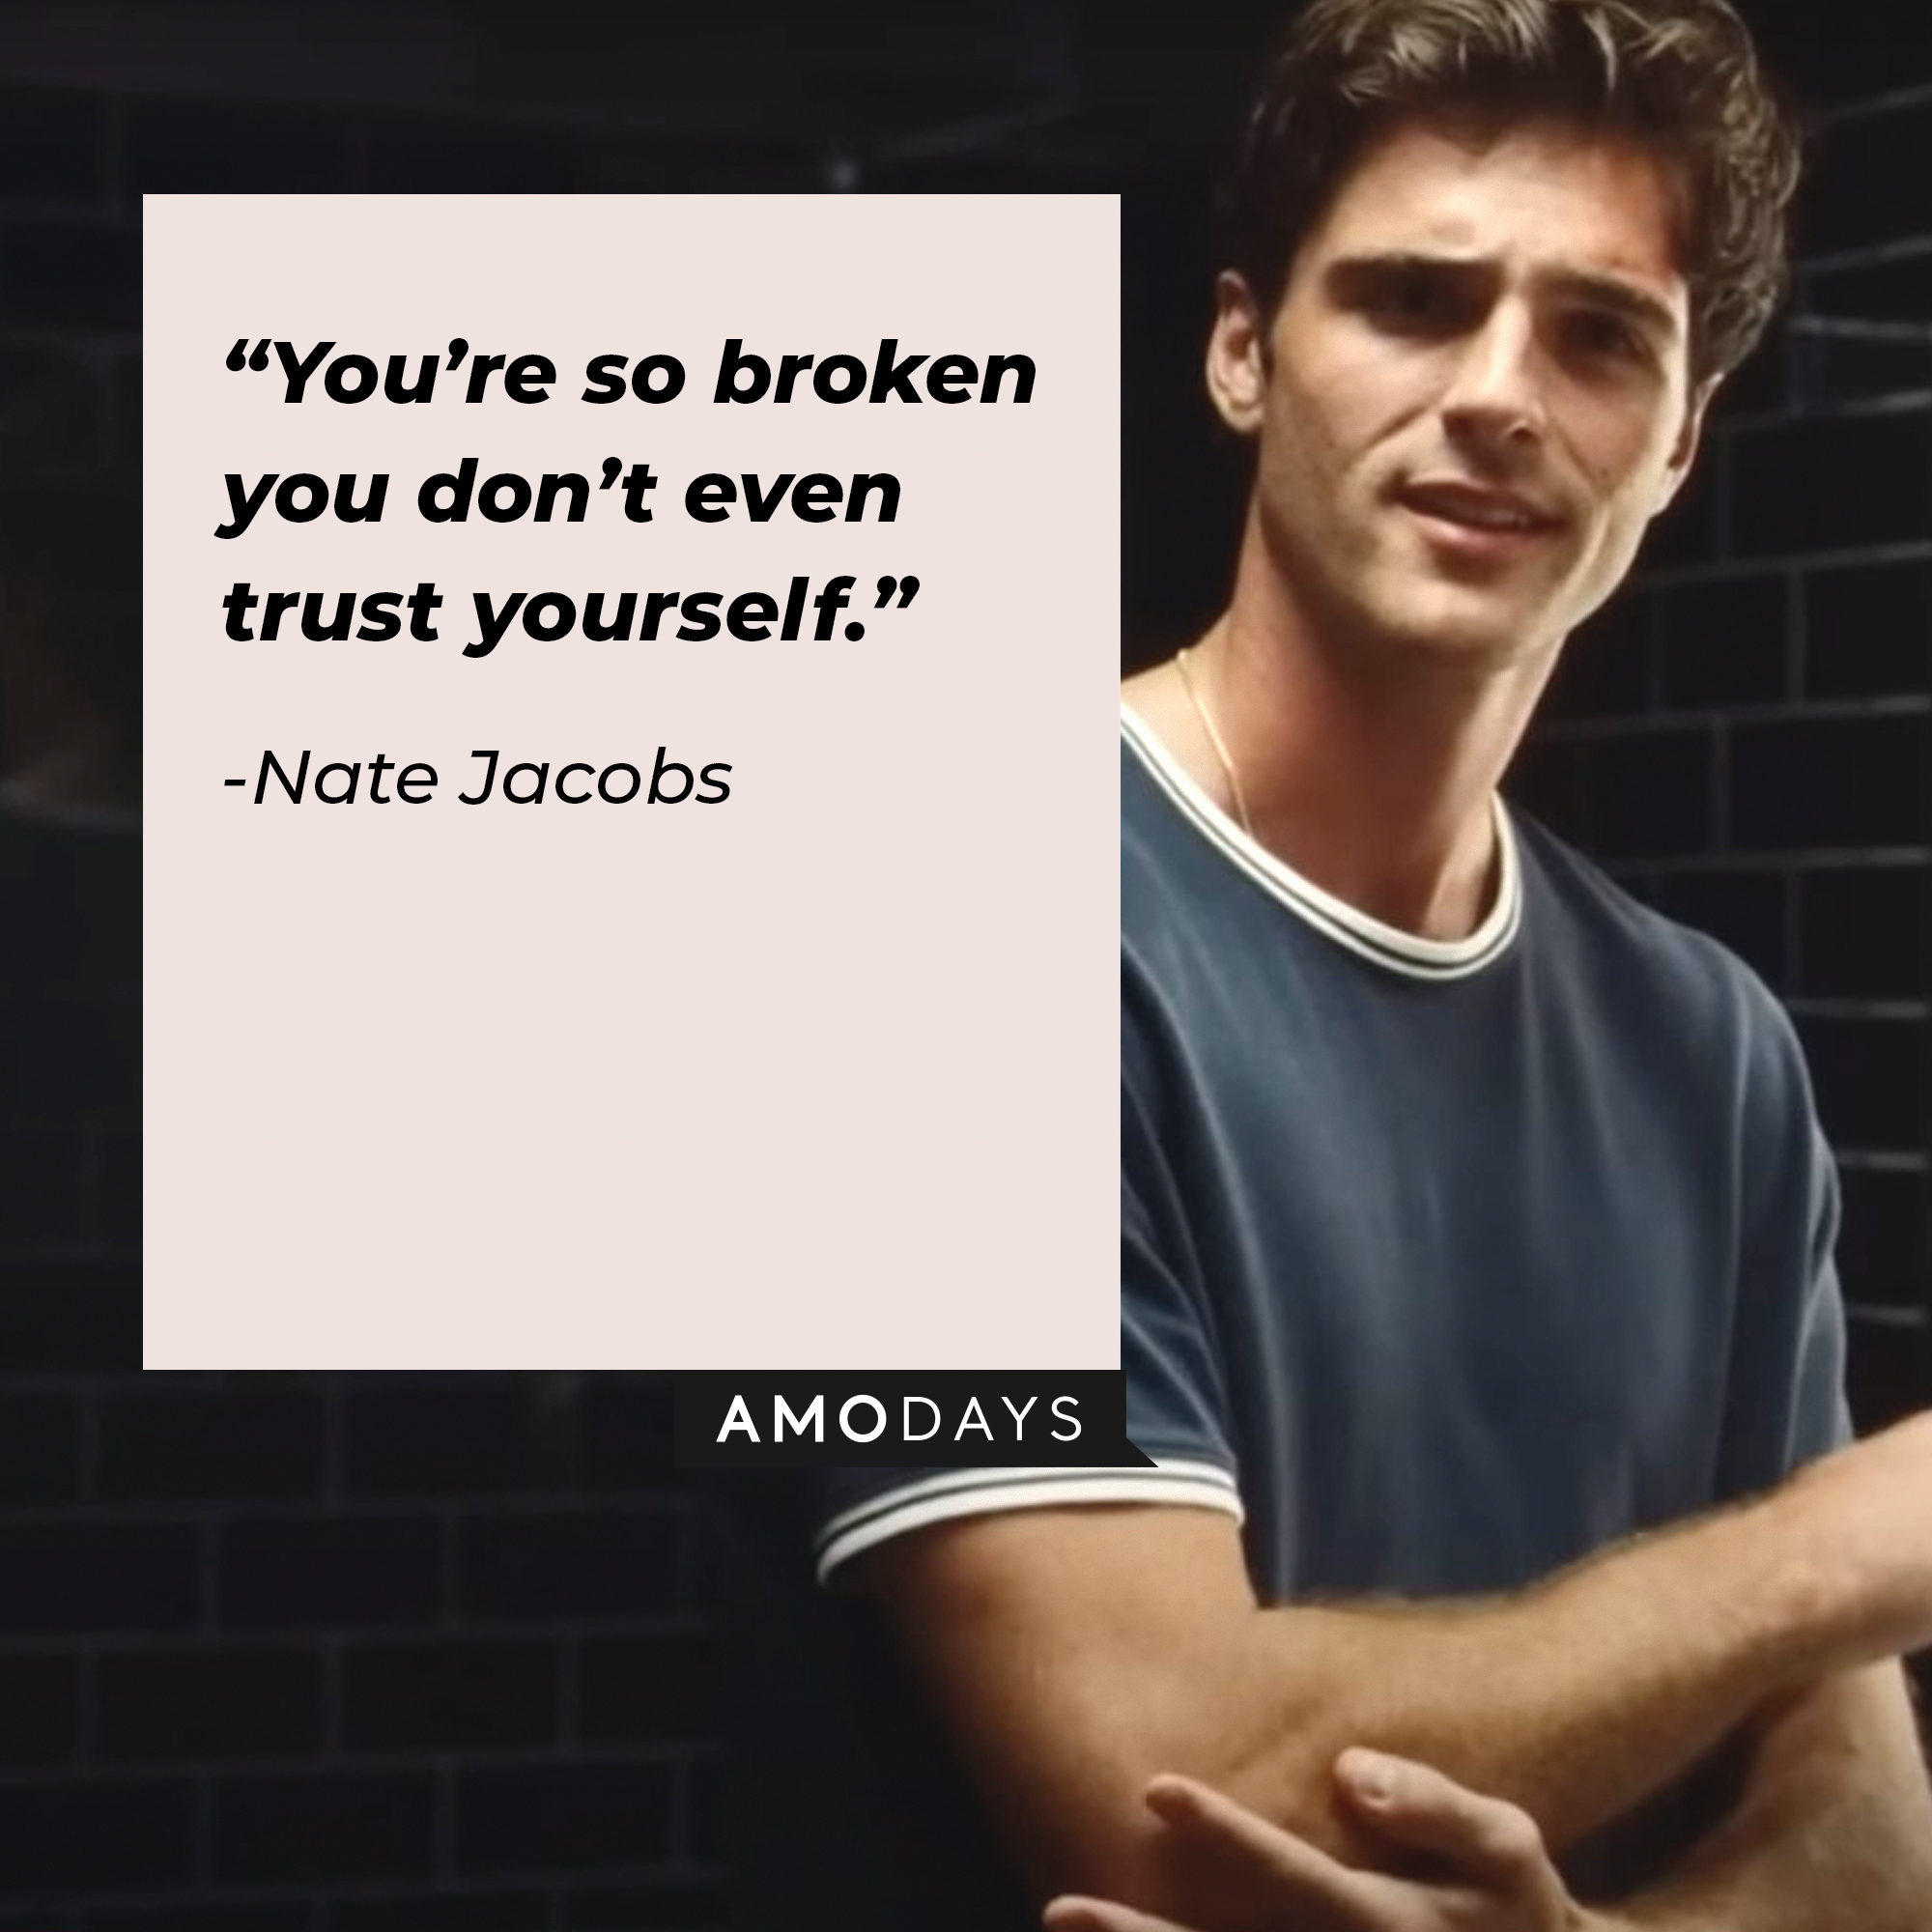 An image of Nate Jacobs with his quote: “You’re so broken you don’t even trust yourself.” | Source: facebook.com/Euphoria